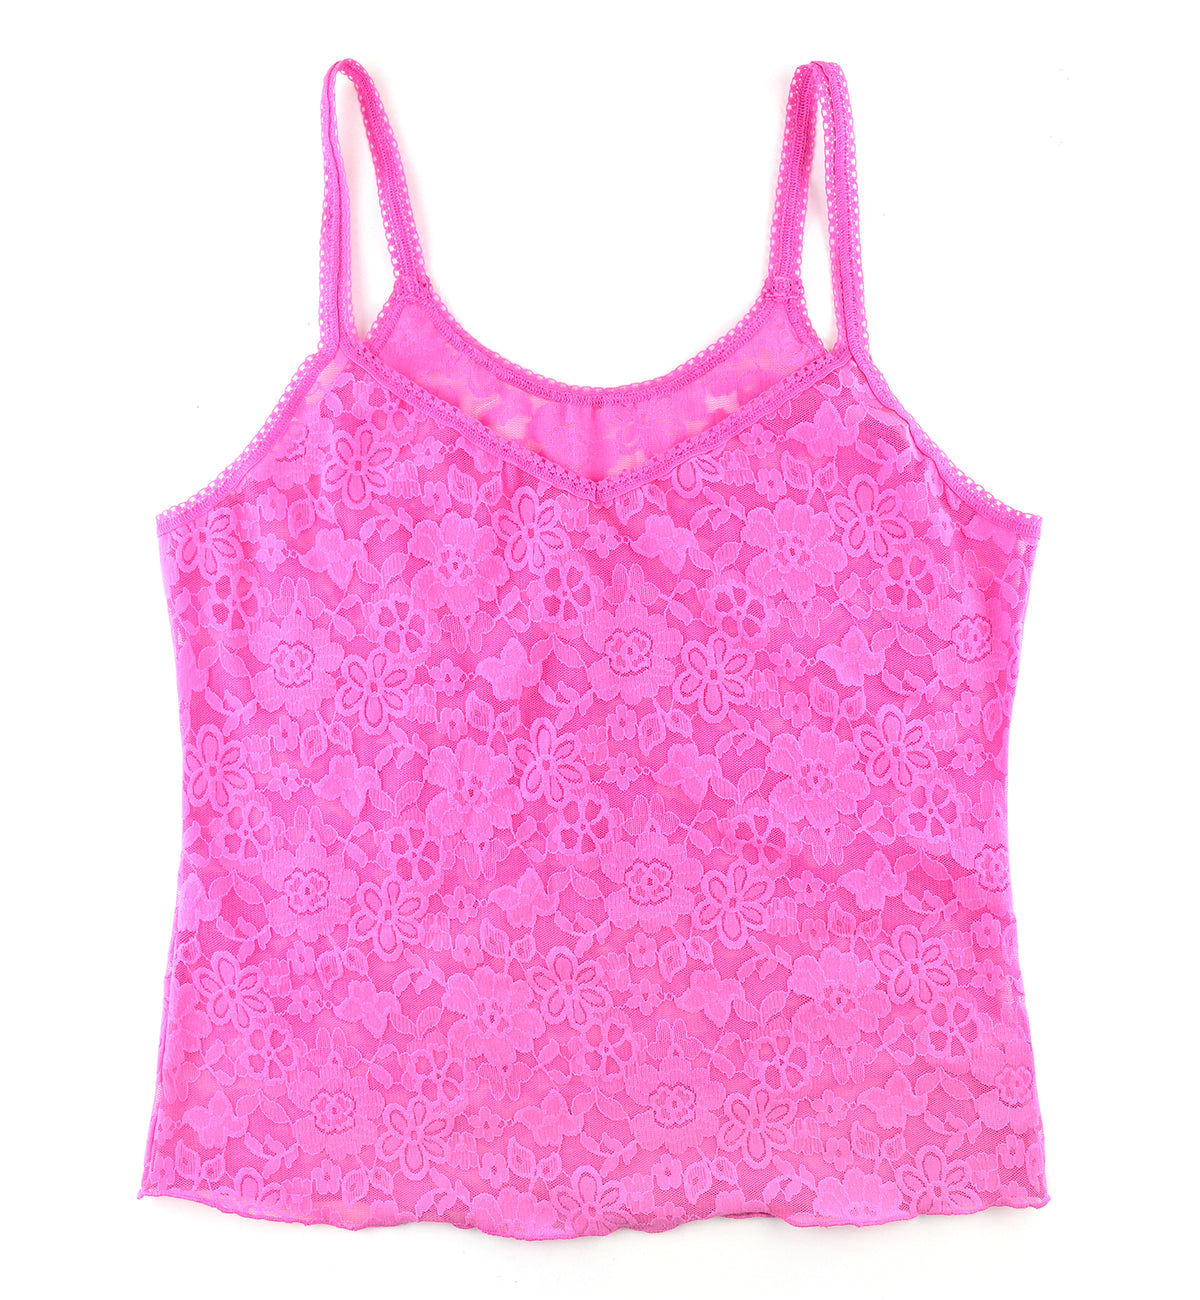 Hanky Panky Daily Lace Camisole (774731),XS,Dream House Pink - Dream House Pink,XS